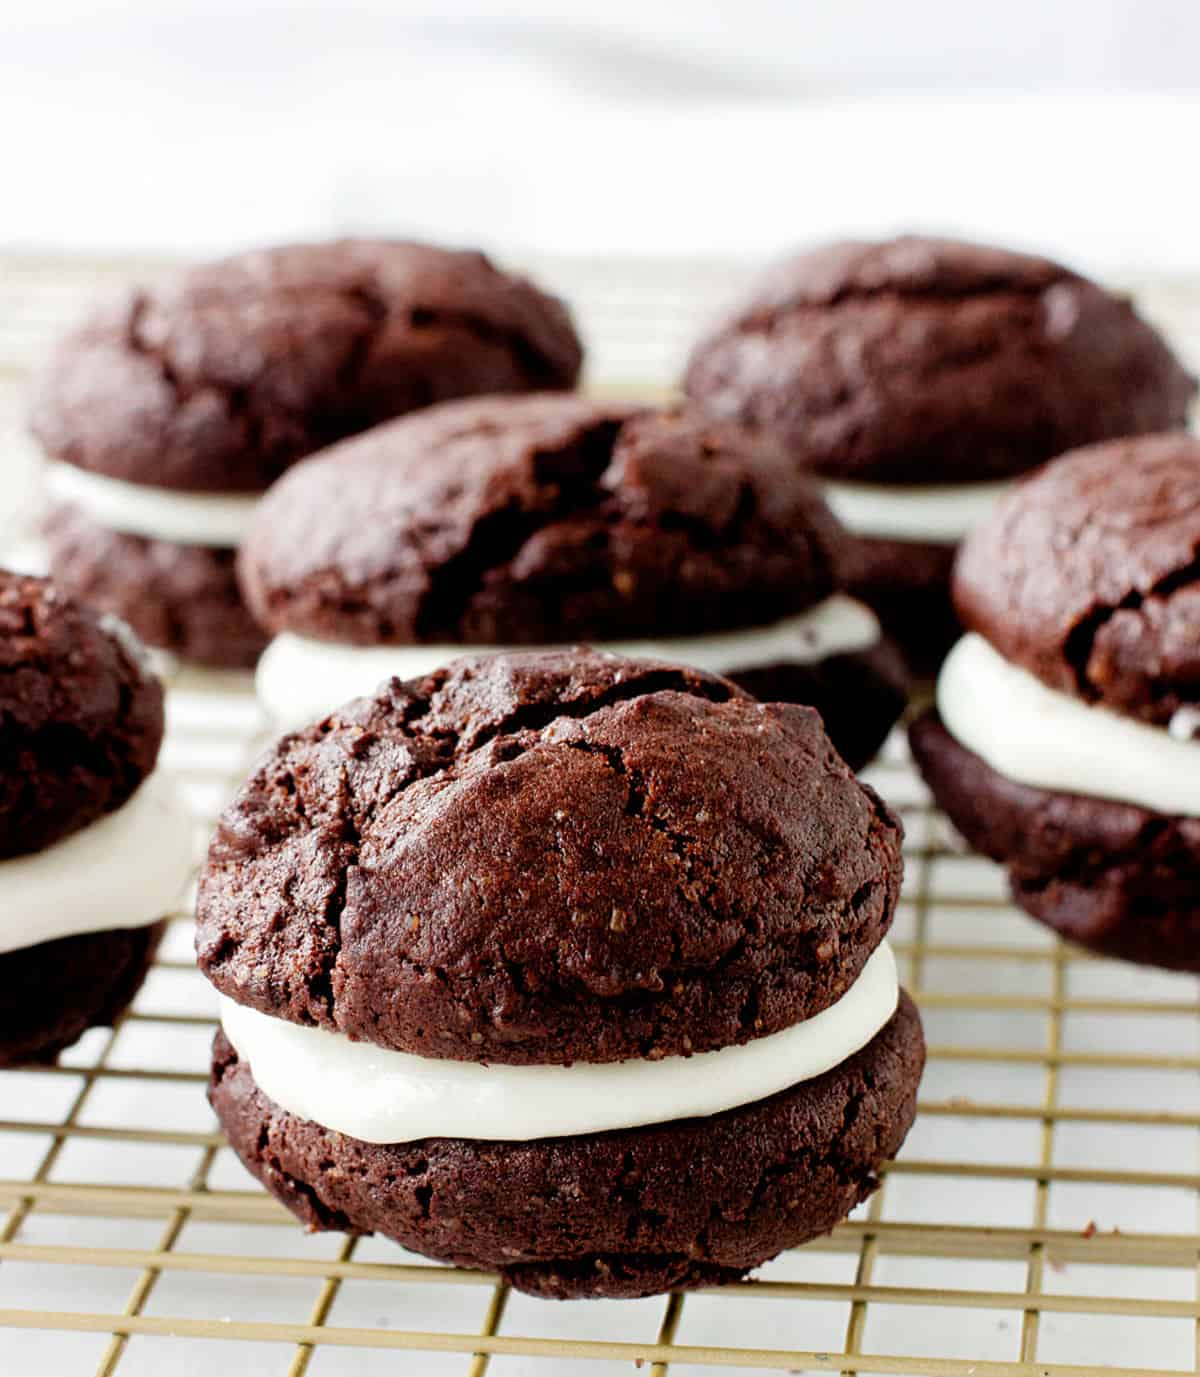 Several chocolate whoopie pies with creamy filling on a golden wire rack